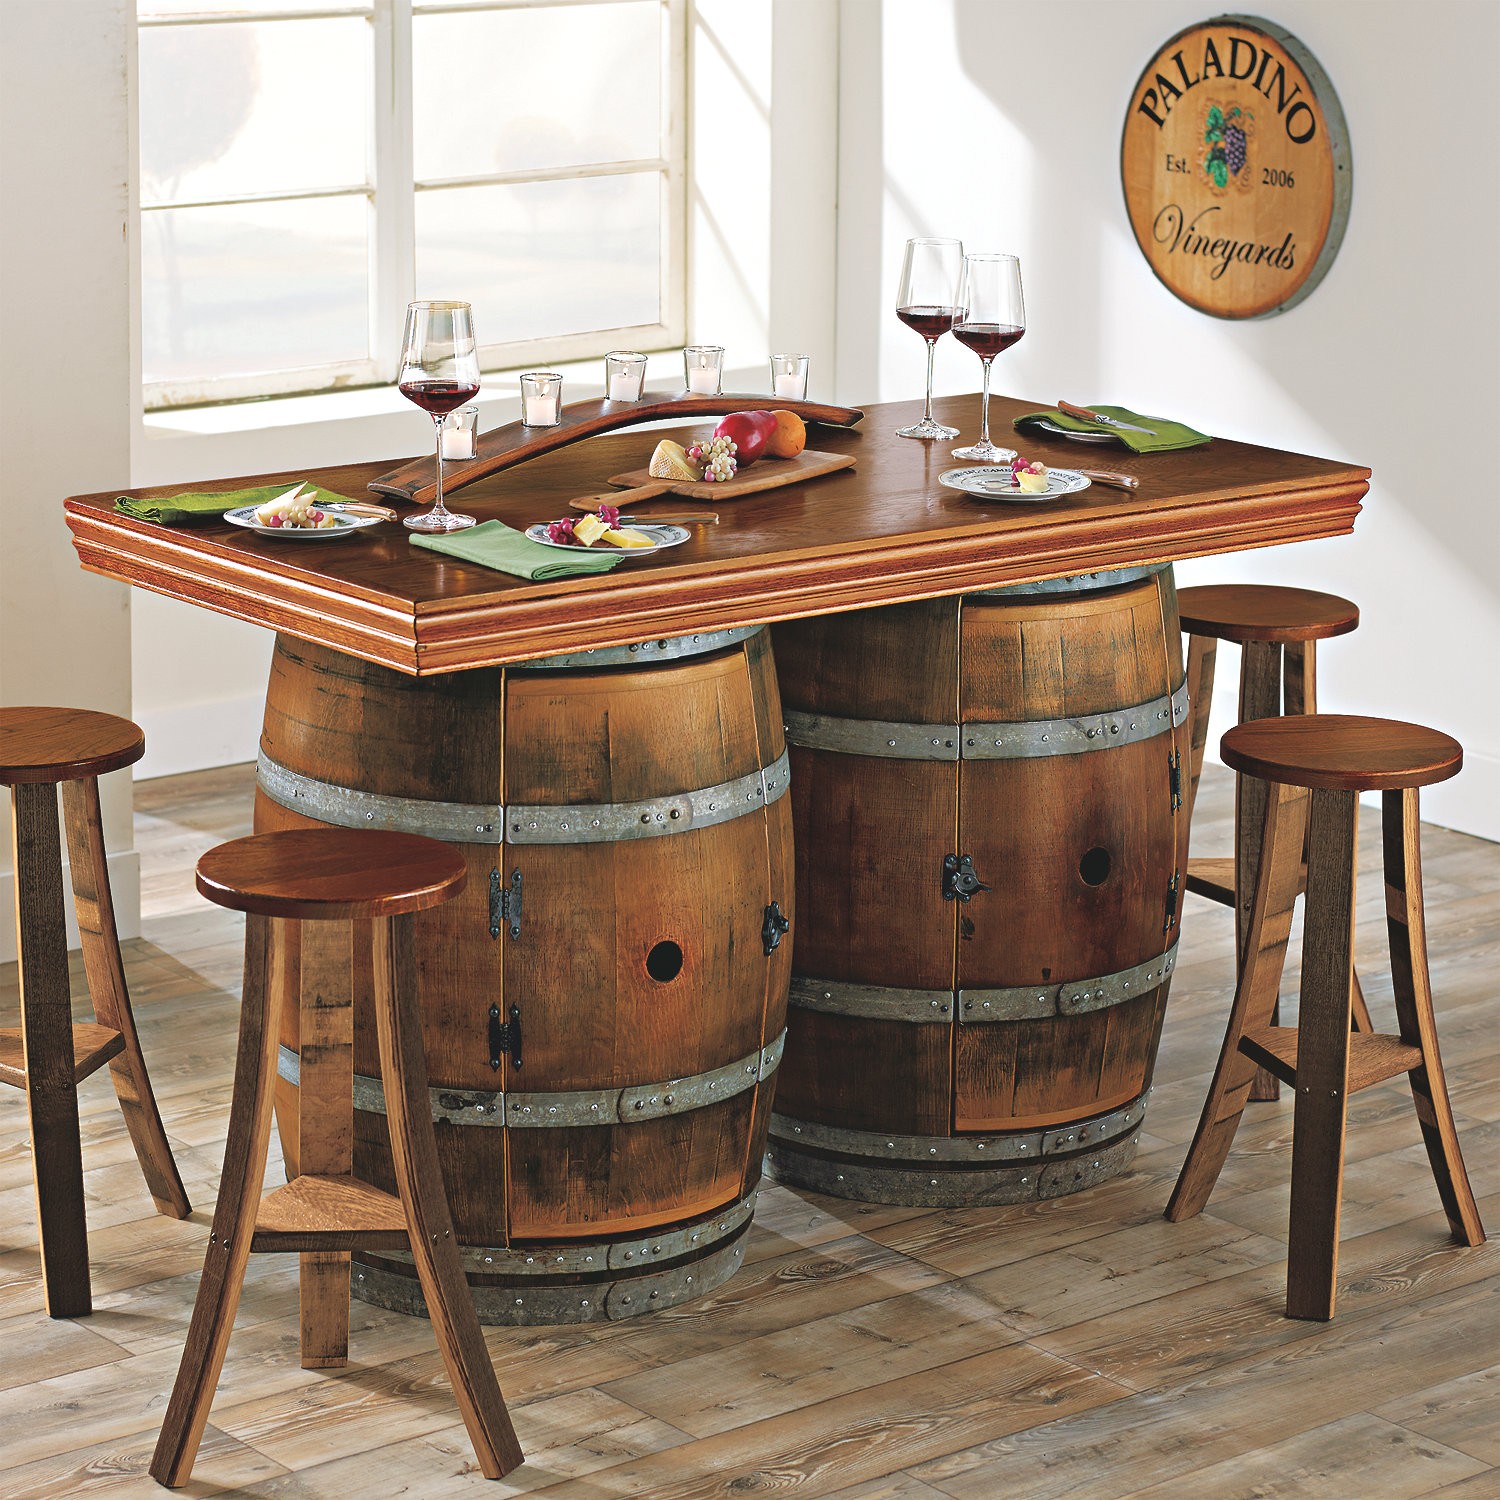 Wine Barrel Table And Chairs | A Creative Mom